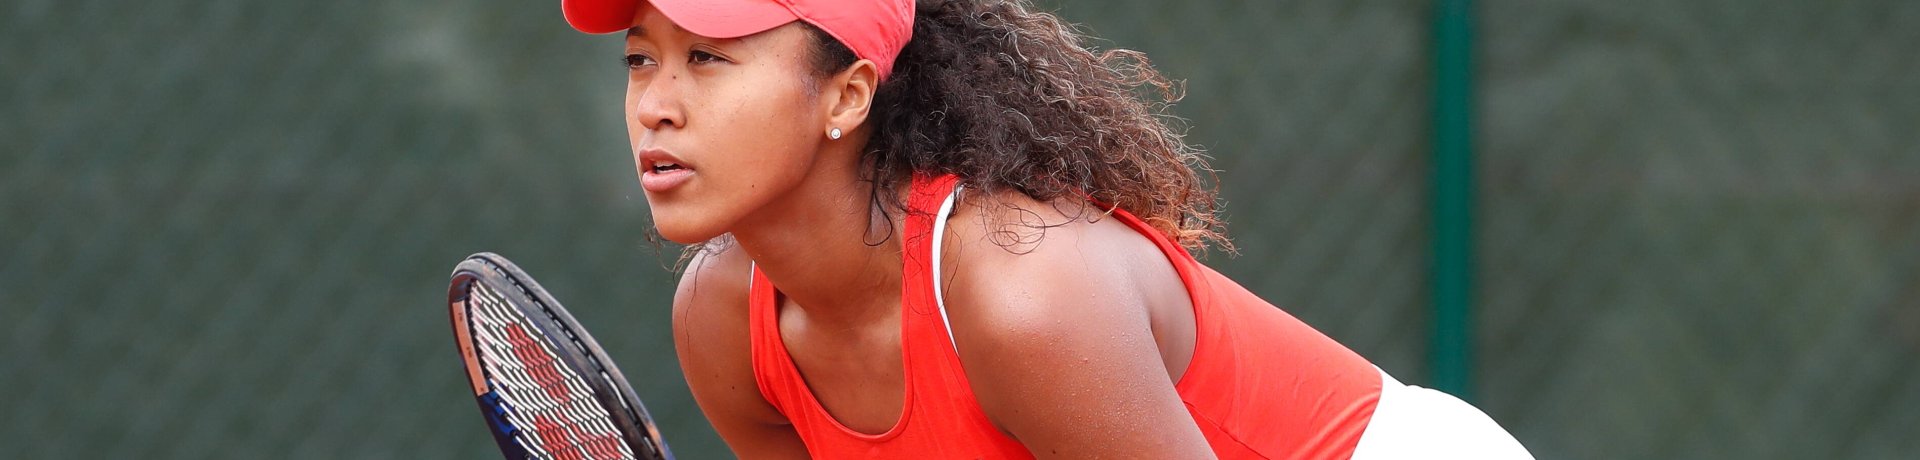 The top earner in the Forbes Ranking 2020: Naomi Osaka.